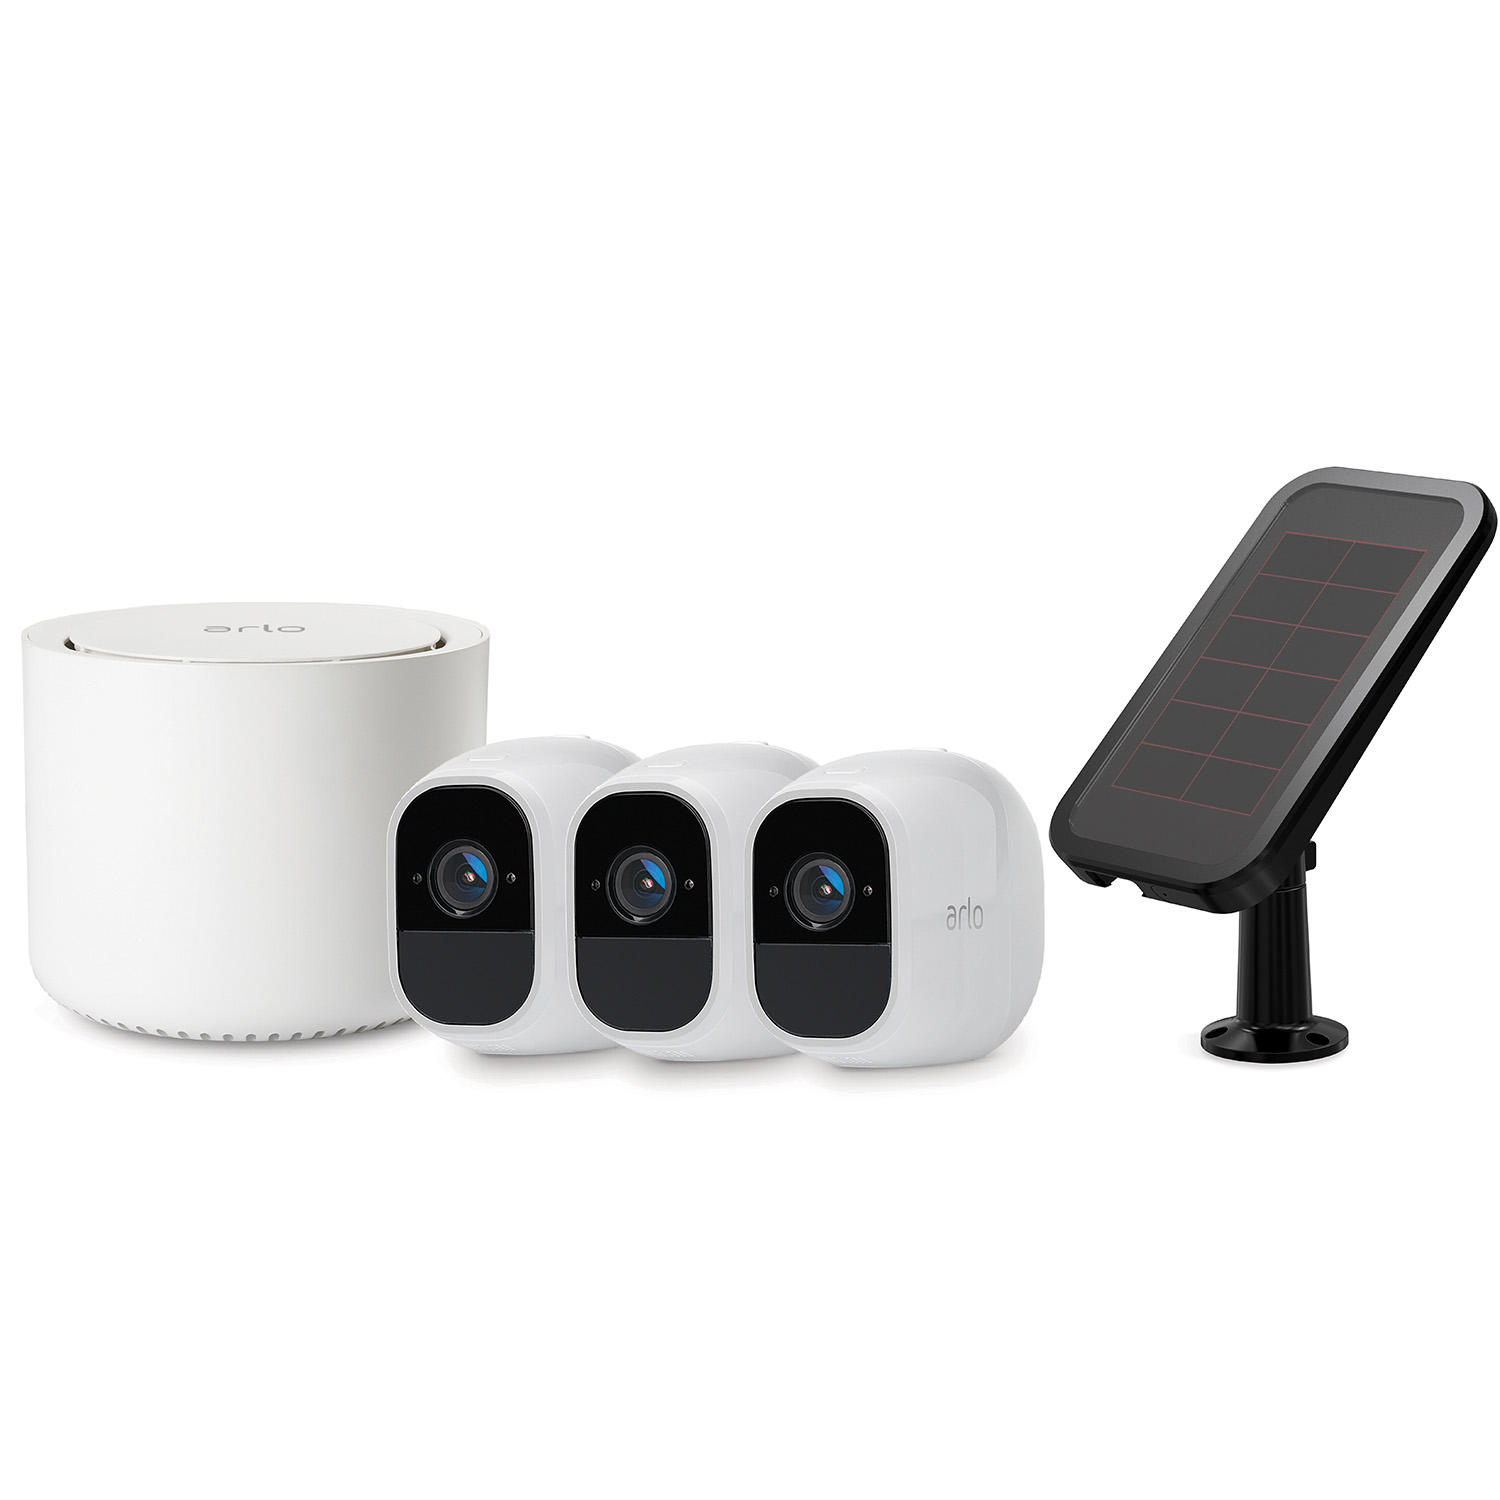 Arlo Pro 2 Wire-Free HD Security Cameras – 3 Pack + Bonus Solar Panel and 3 Months of Arlo Smart